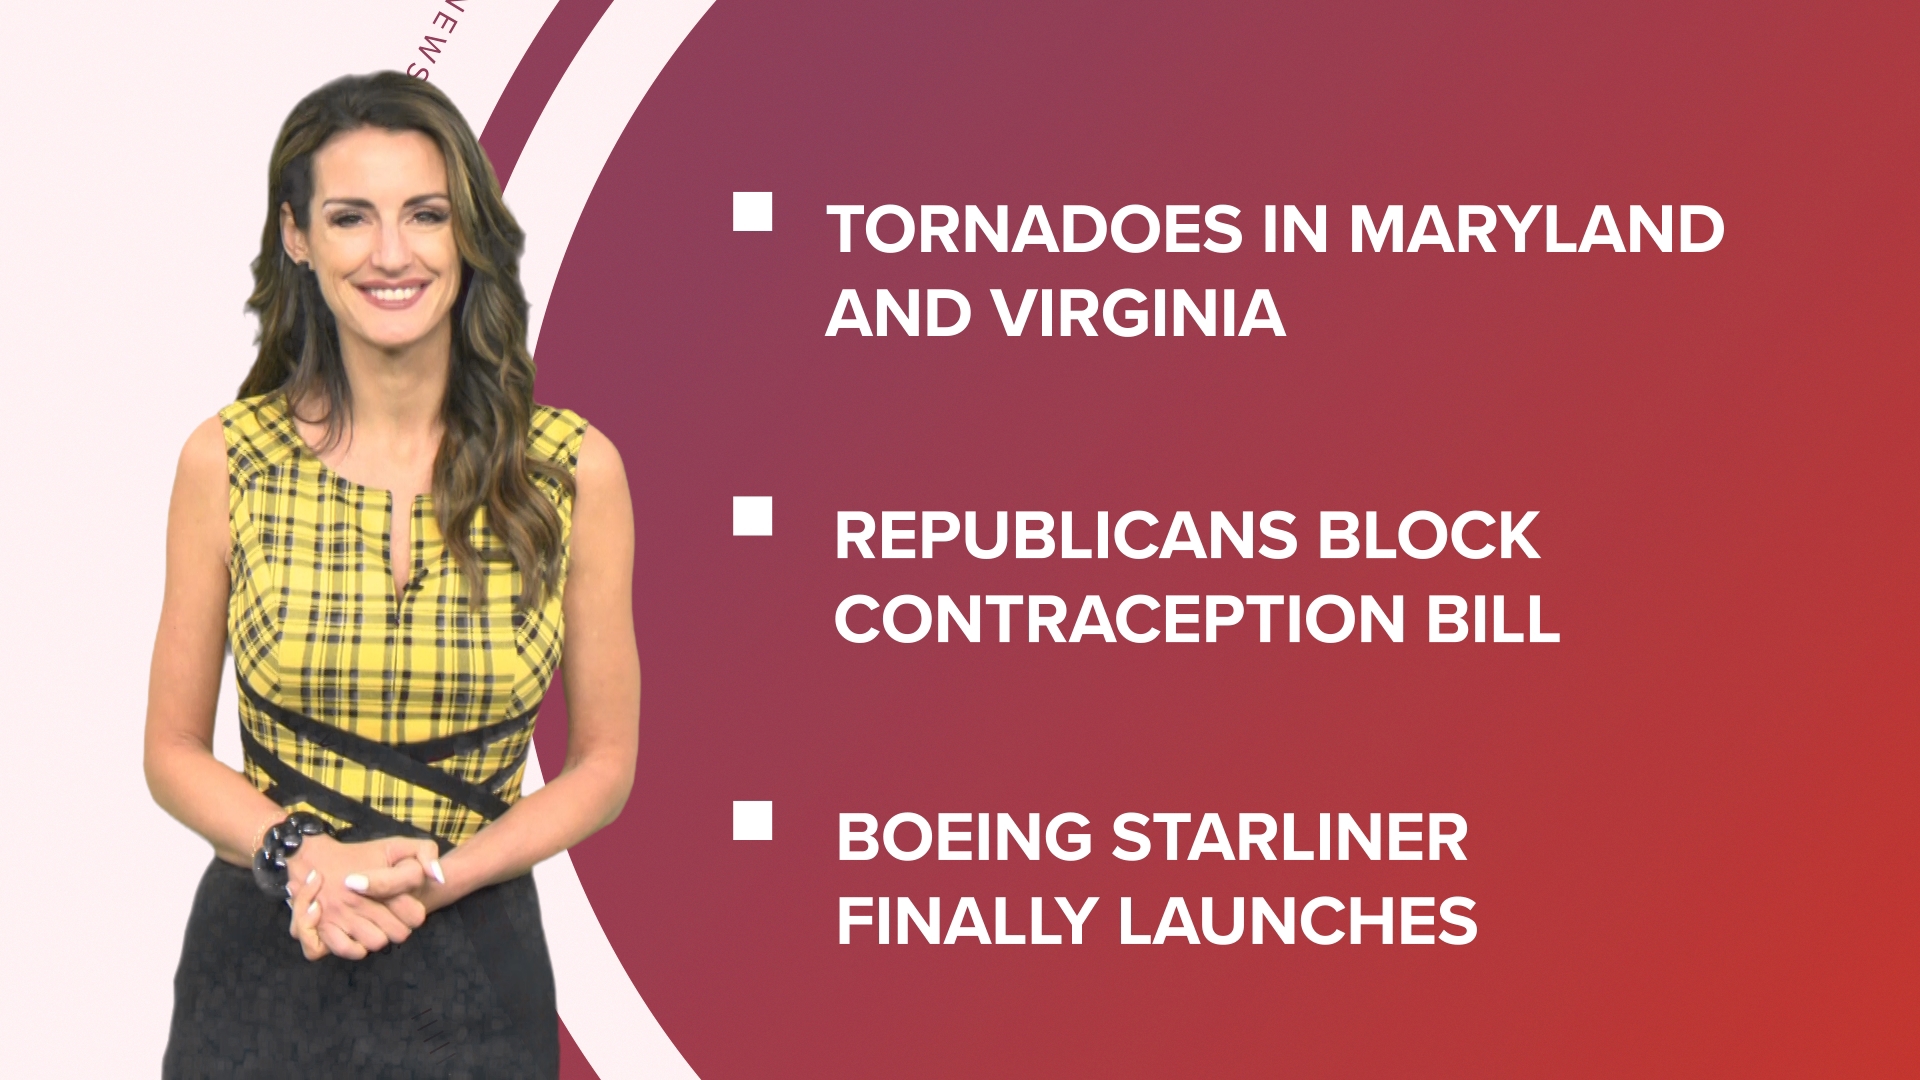 A look at what is happening in the news from tornadoes hit Maryland and Virginia to a contraception bill blocked in the Senate and the 80th anniversary of D-Day.